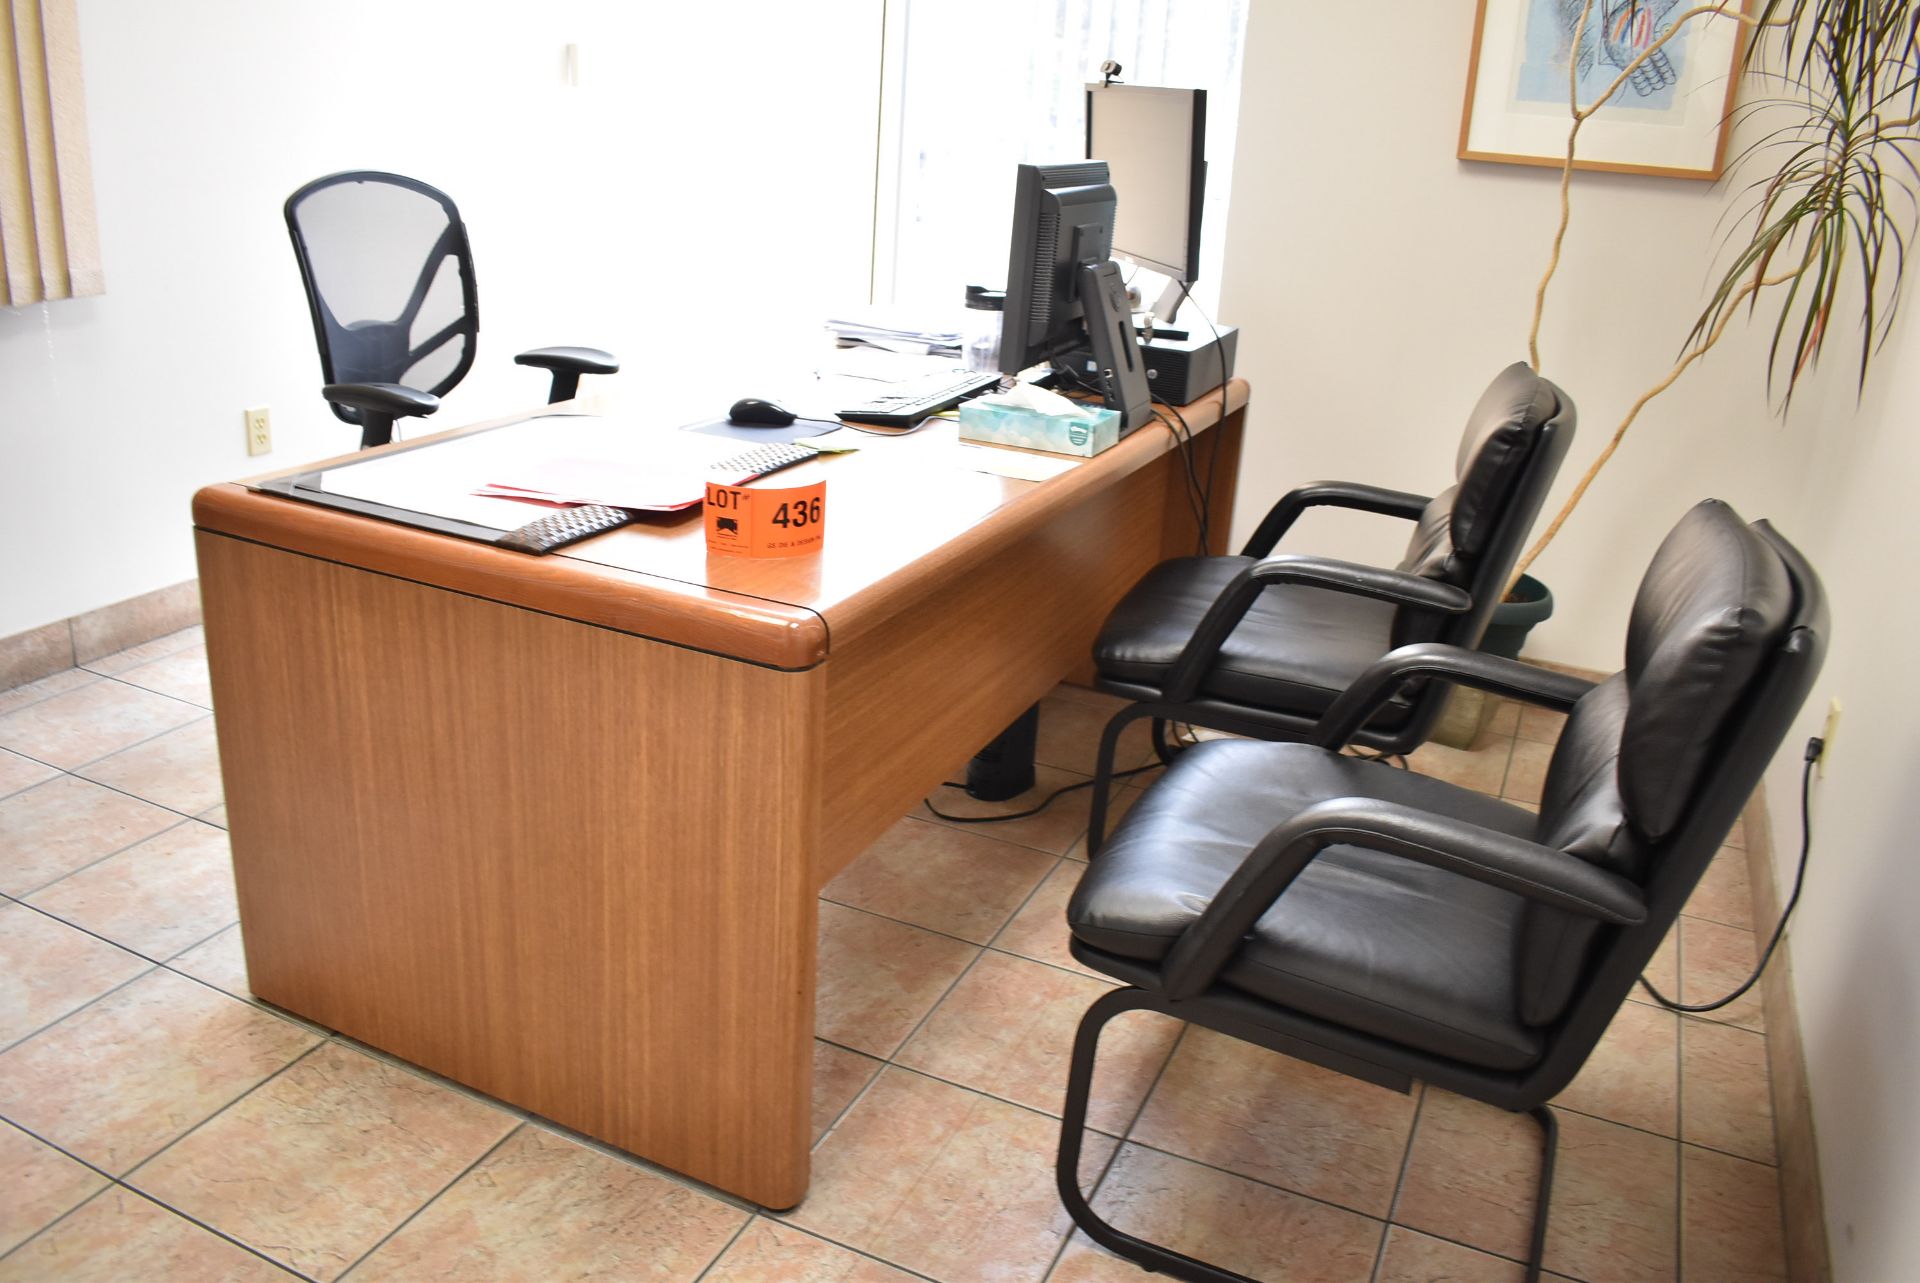 LOT/ OFFICE FURNITURE CONSISTING OF DESK, CREDENZA & (3) CHAIRS (FURNITURE ONLY - NO CONTENTS OR